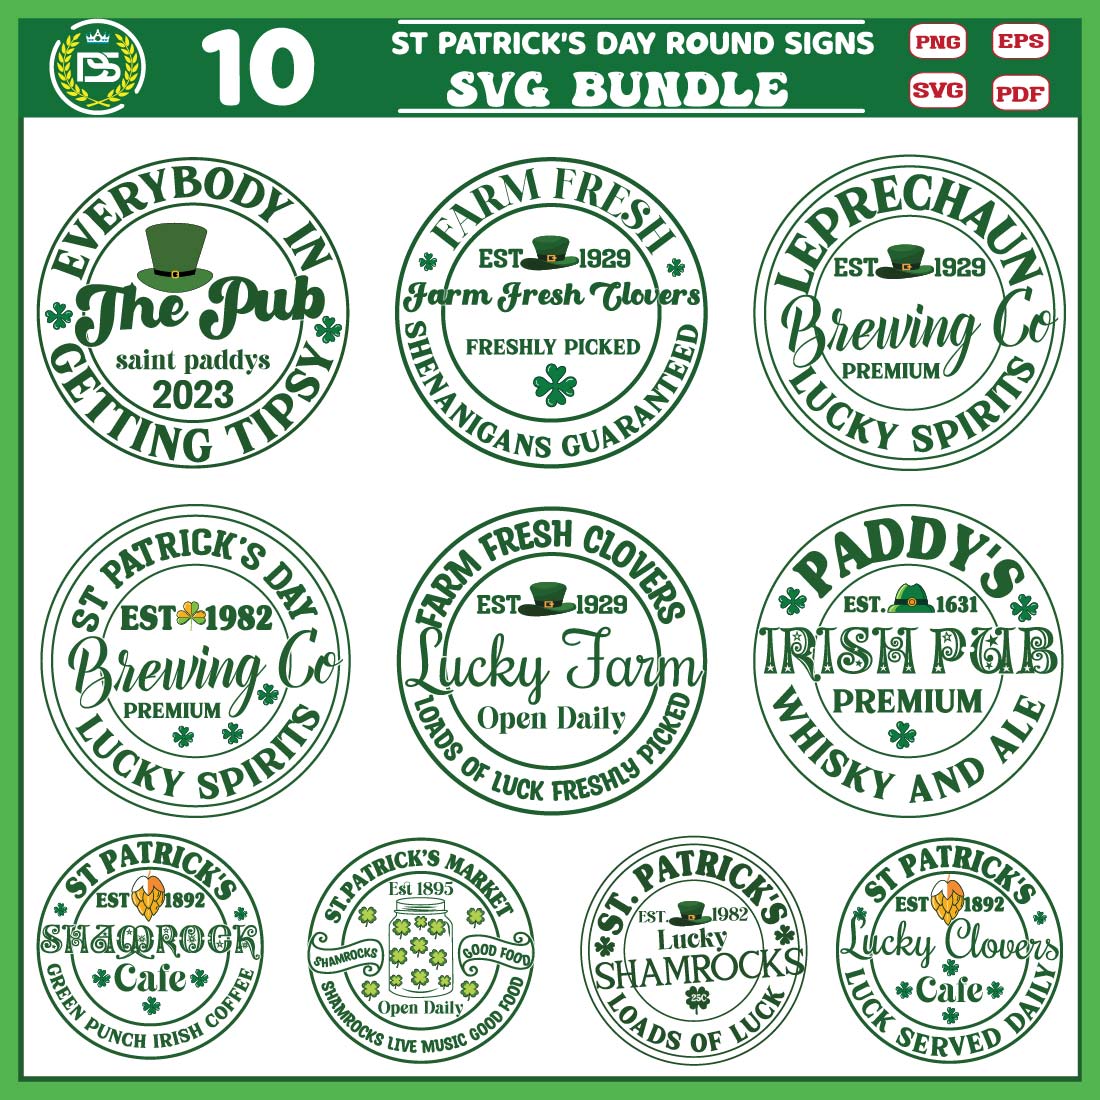 St Patrick’s Day Round Signs SVG Bundle cover image.